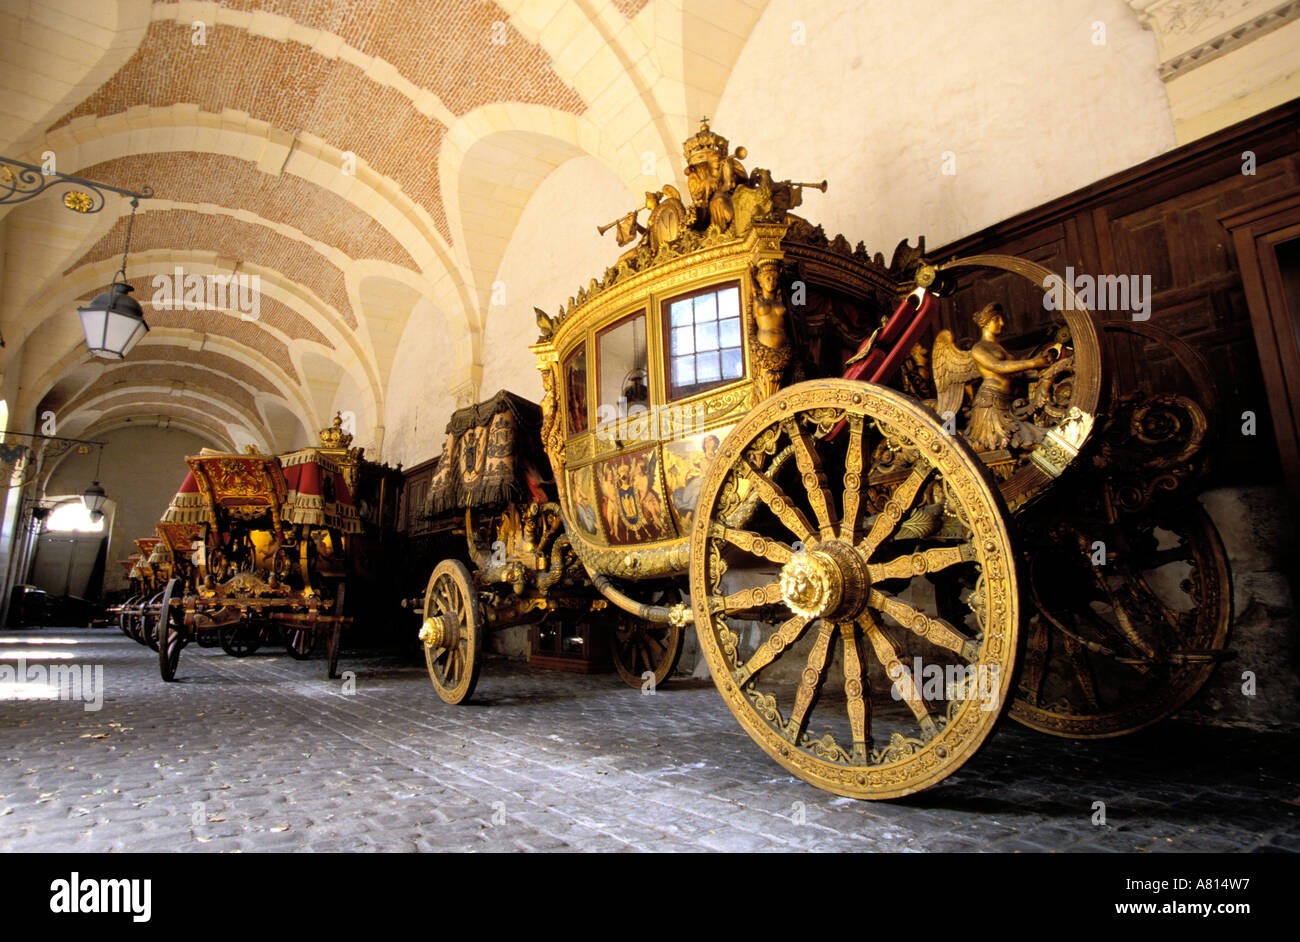 France, Yvelines, Versailles, Musee des Carosses (Carriage Museum) Stock Photo